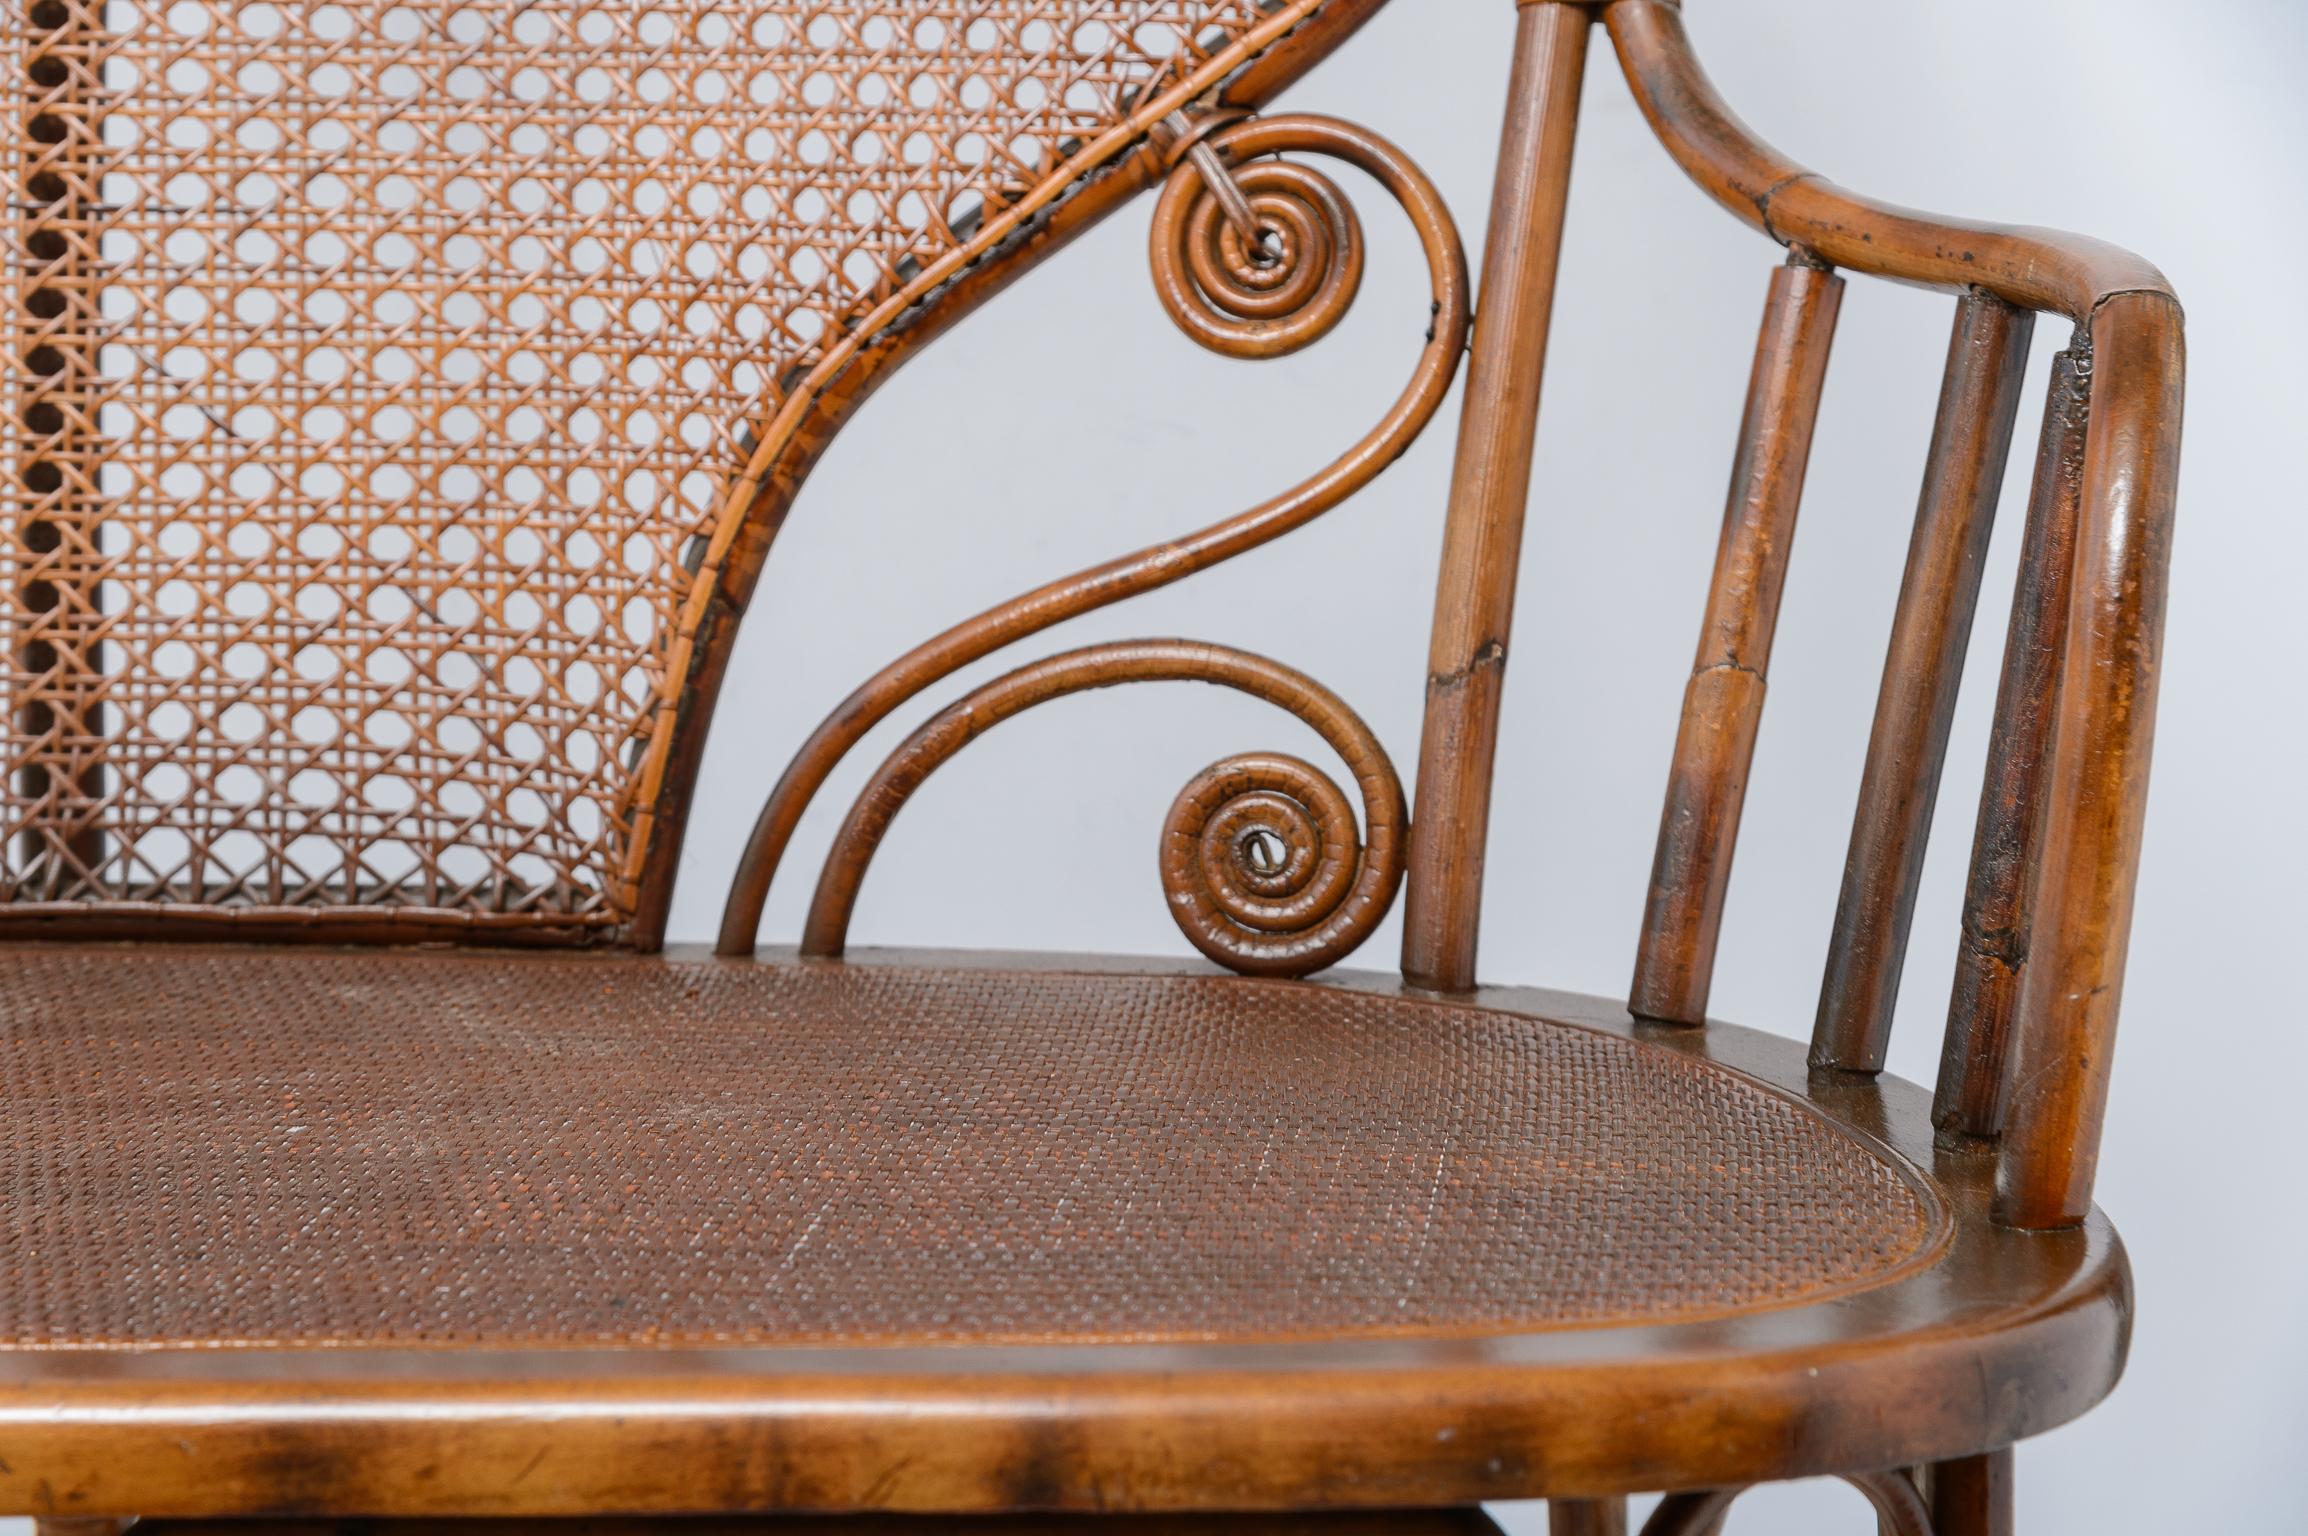 Caning Antique Bentwood & Cane Settee, Attributed to Michael Thonet, C1900-1920s For Sale